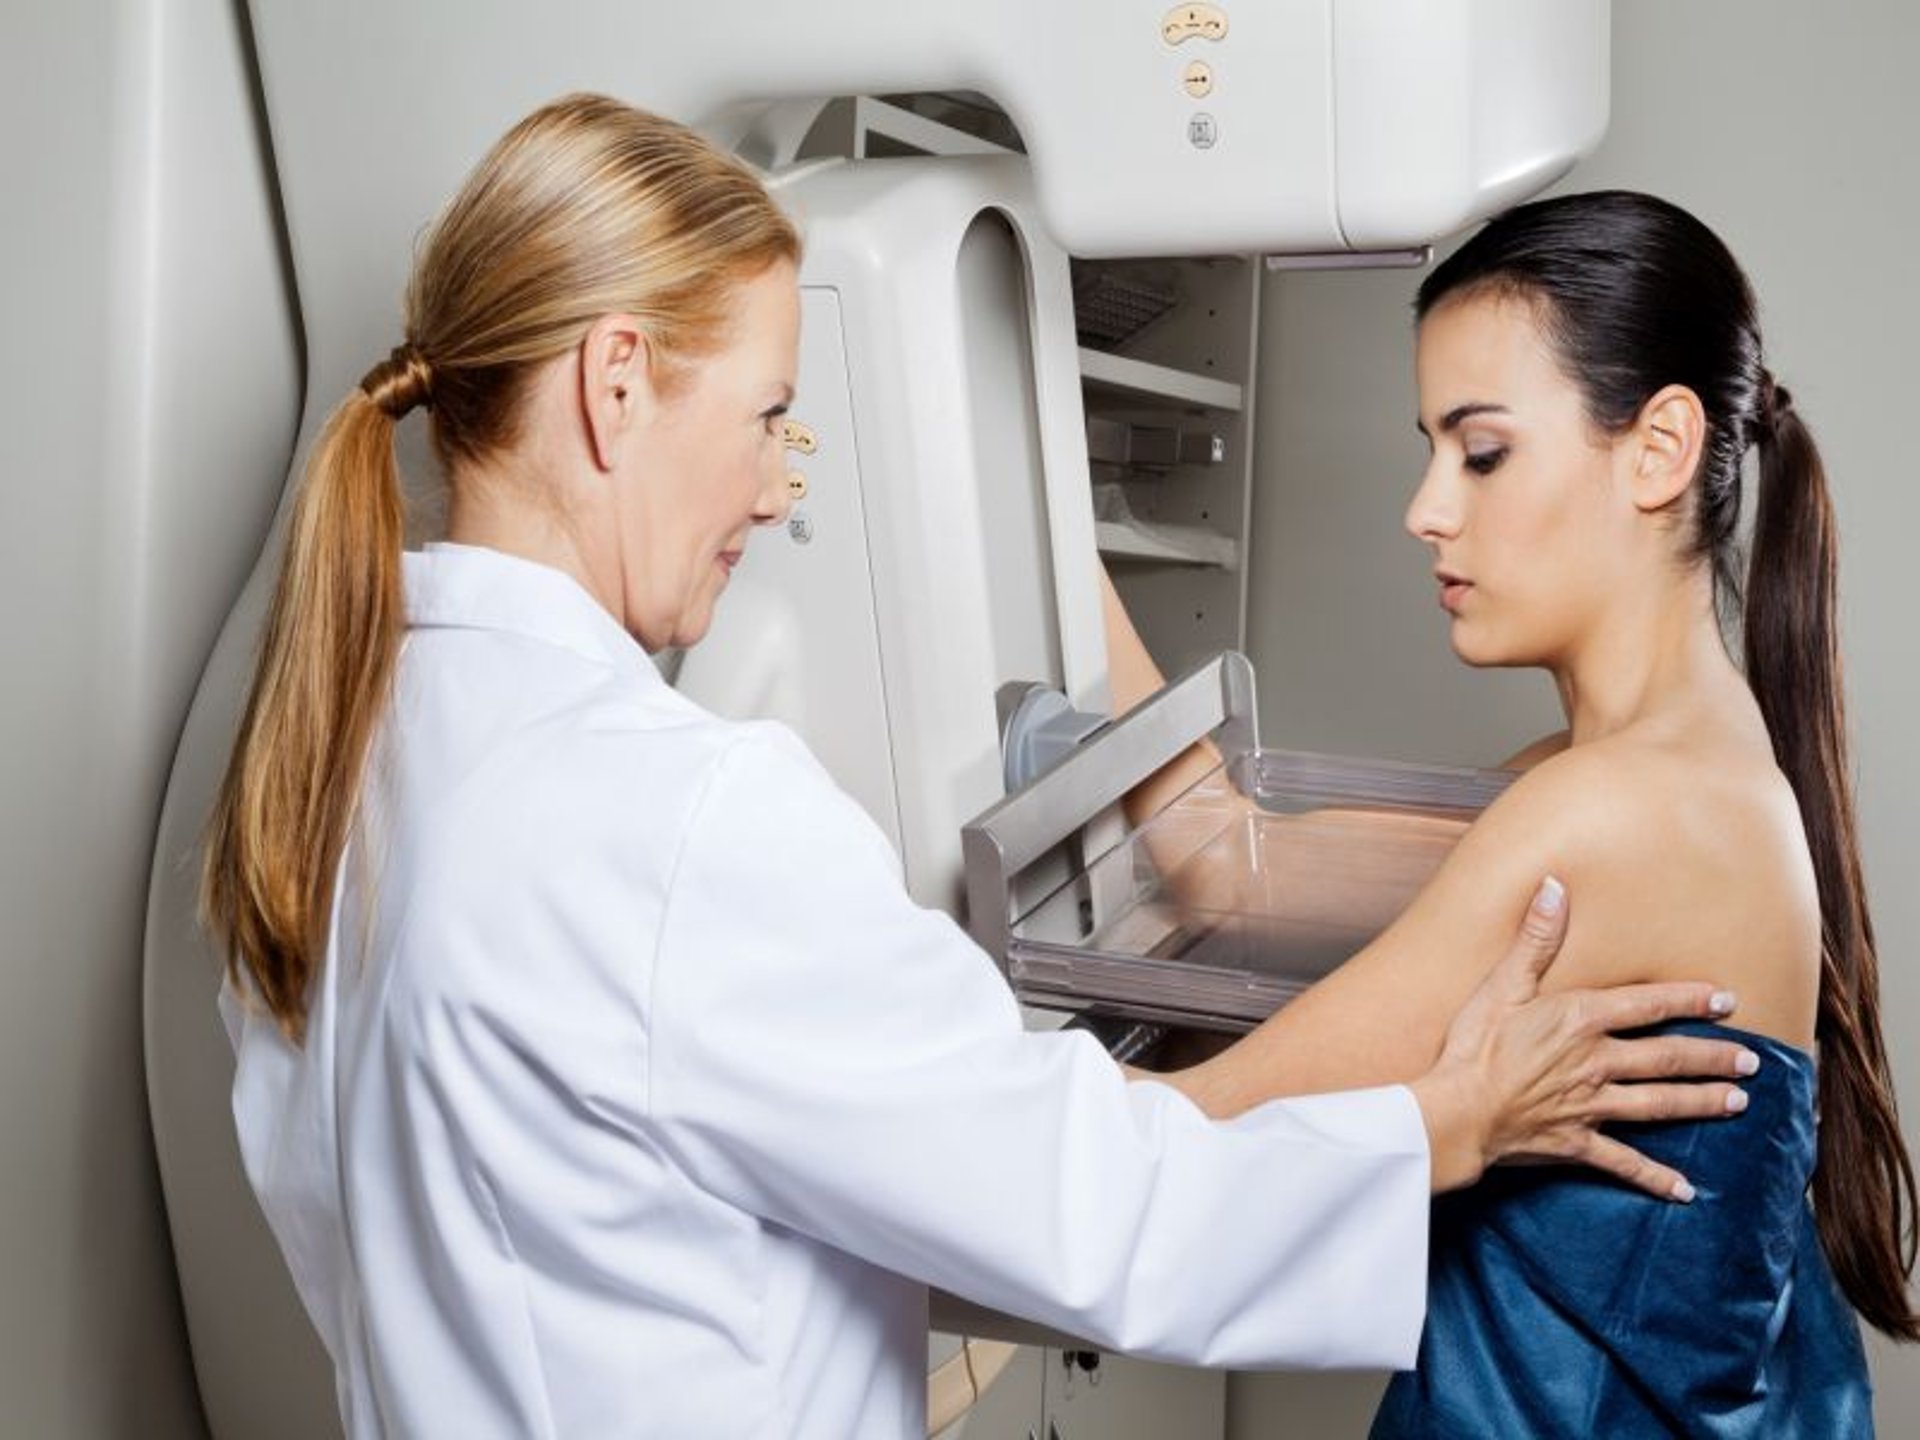 News Picture: How Benign Are 'Benign' Breast Findings? Study Finds Link to Higher Cancer Risk